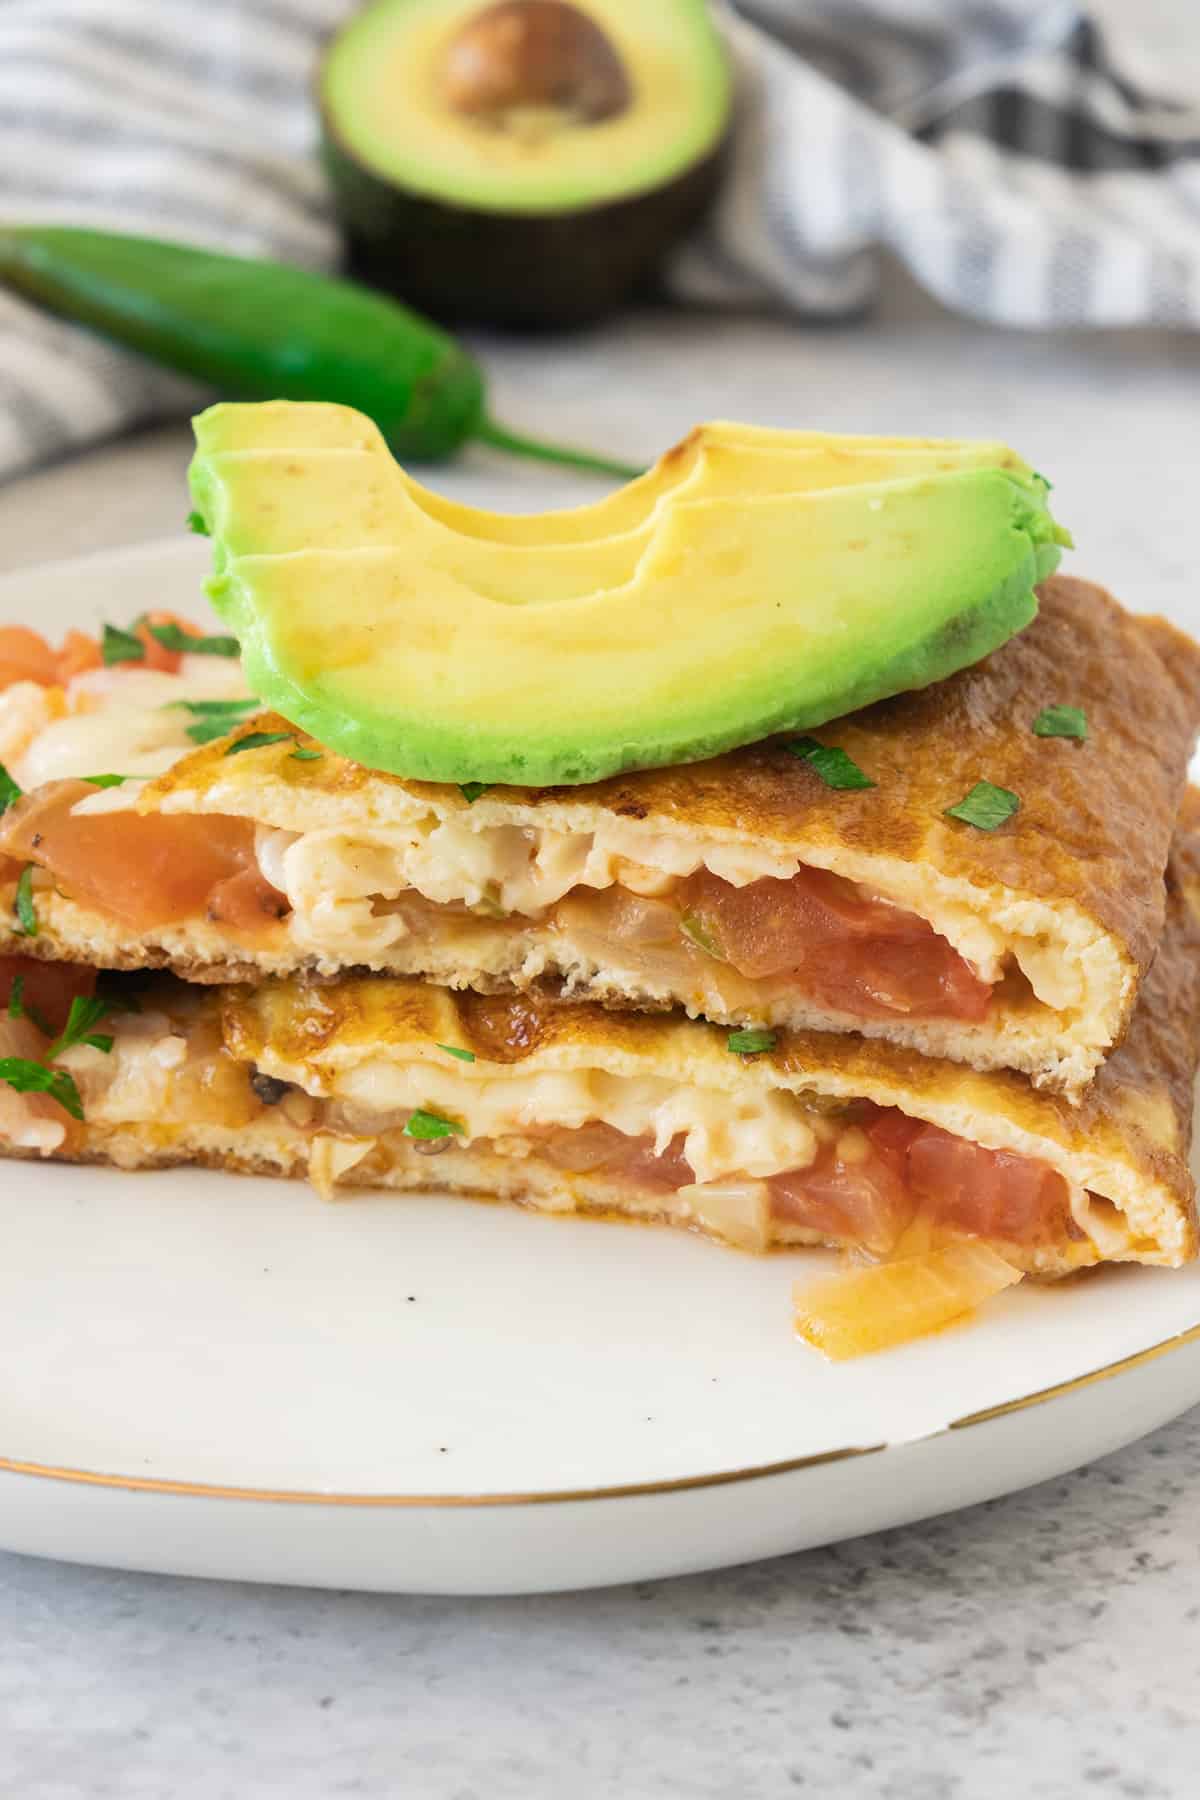 A Mexican omelette cut in half and topped with avocado slices.